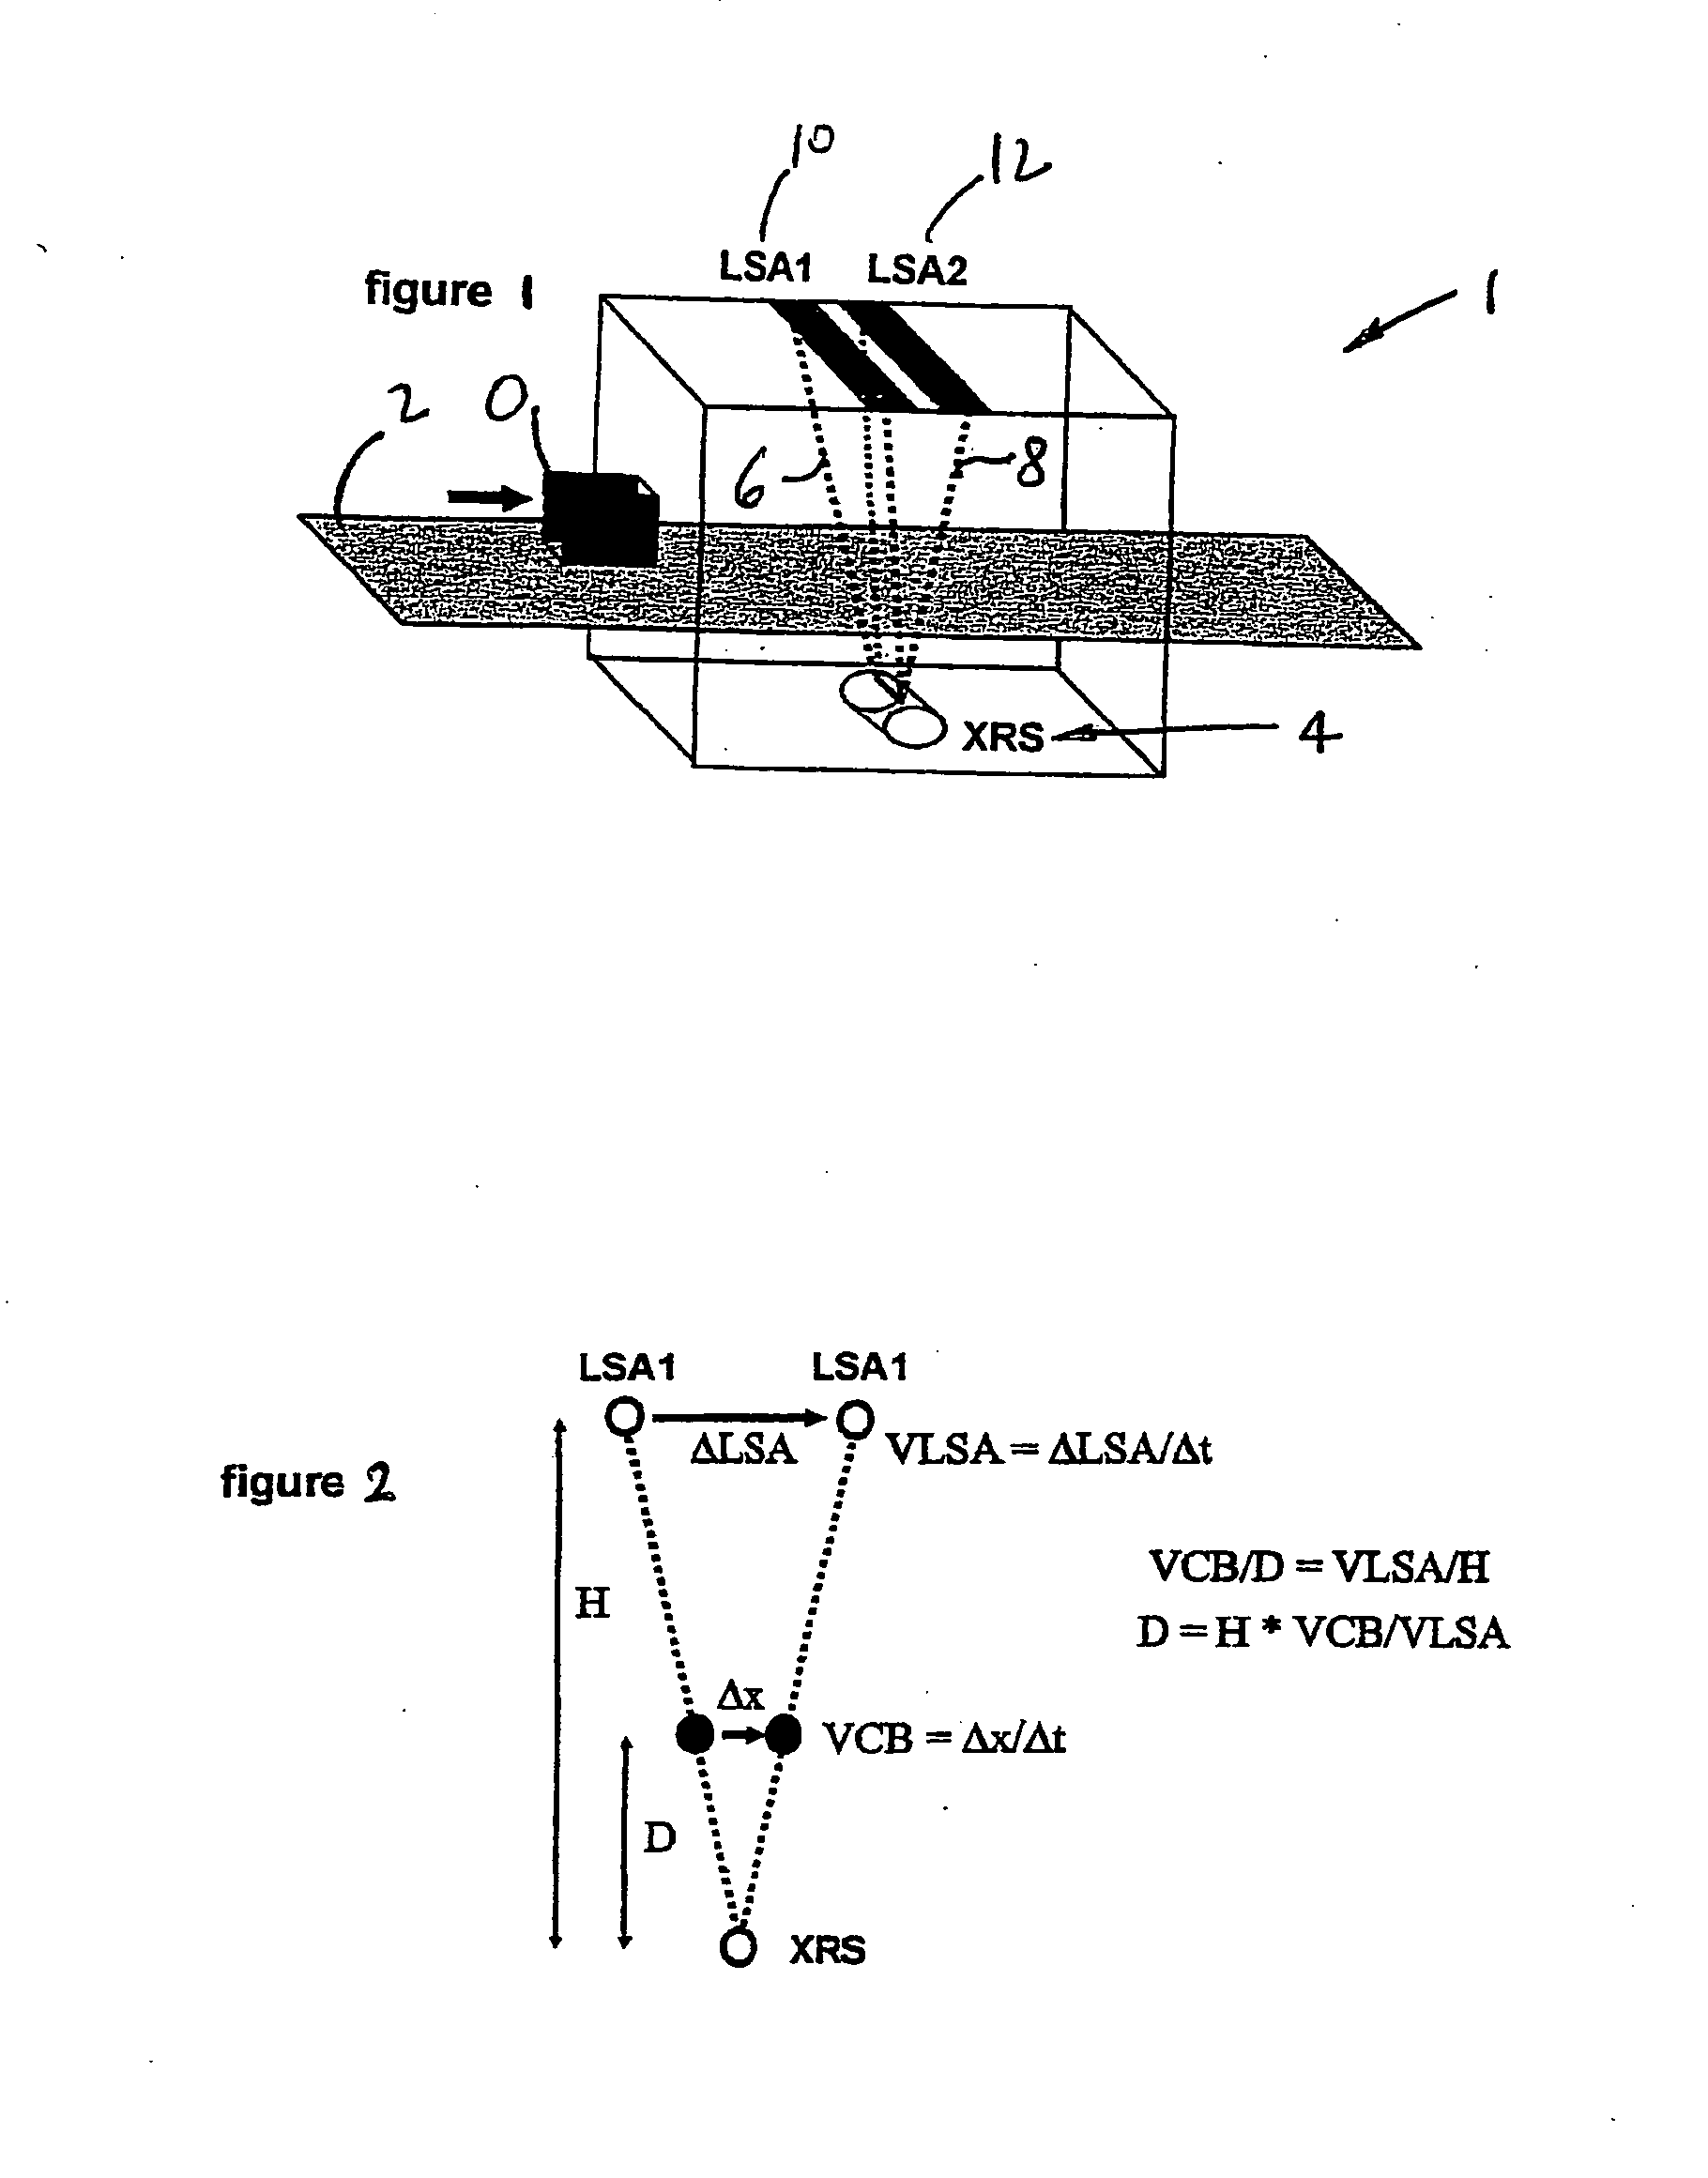 Stereoscopic x-ray imaging apparatus for obtaining three dimensional coordinates